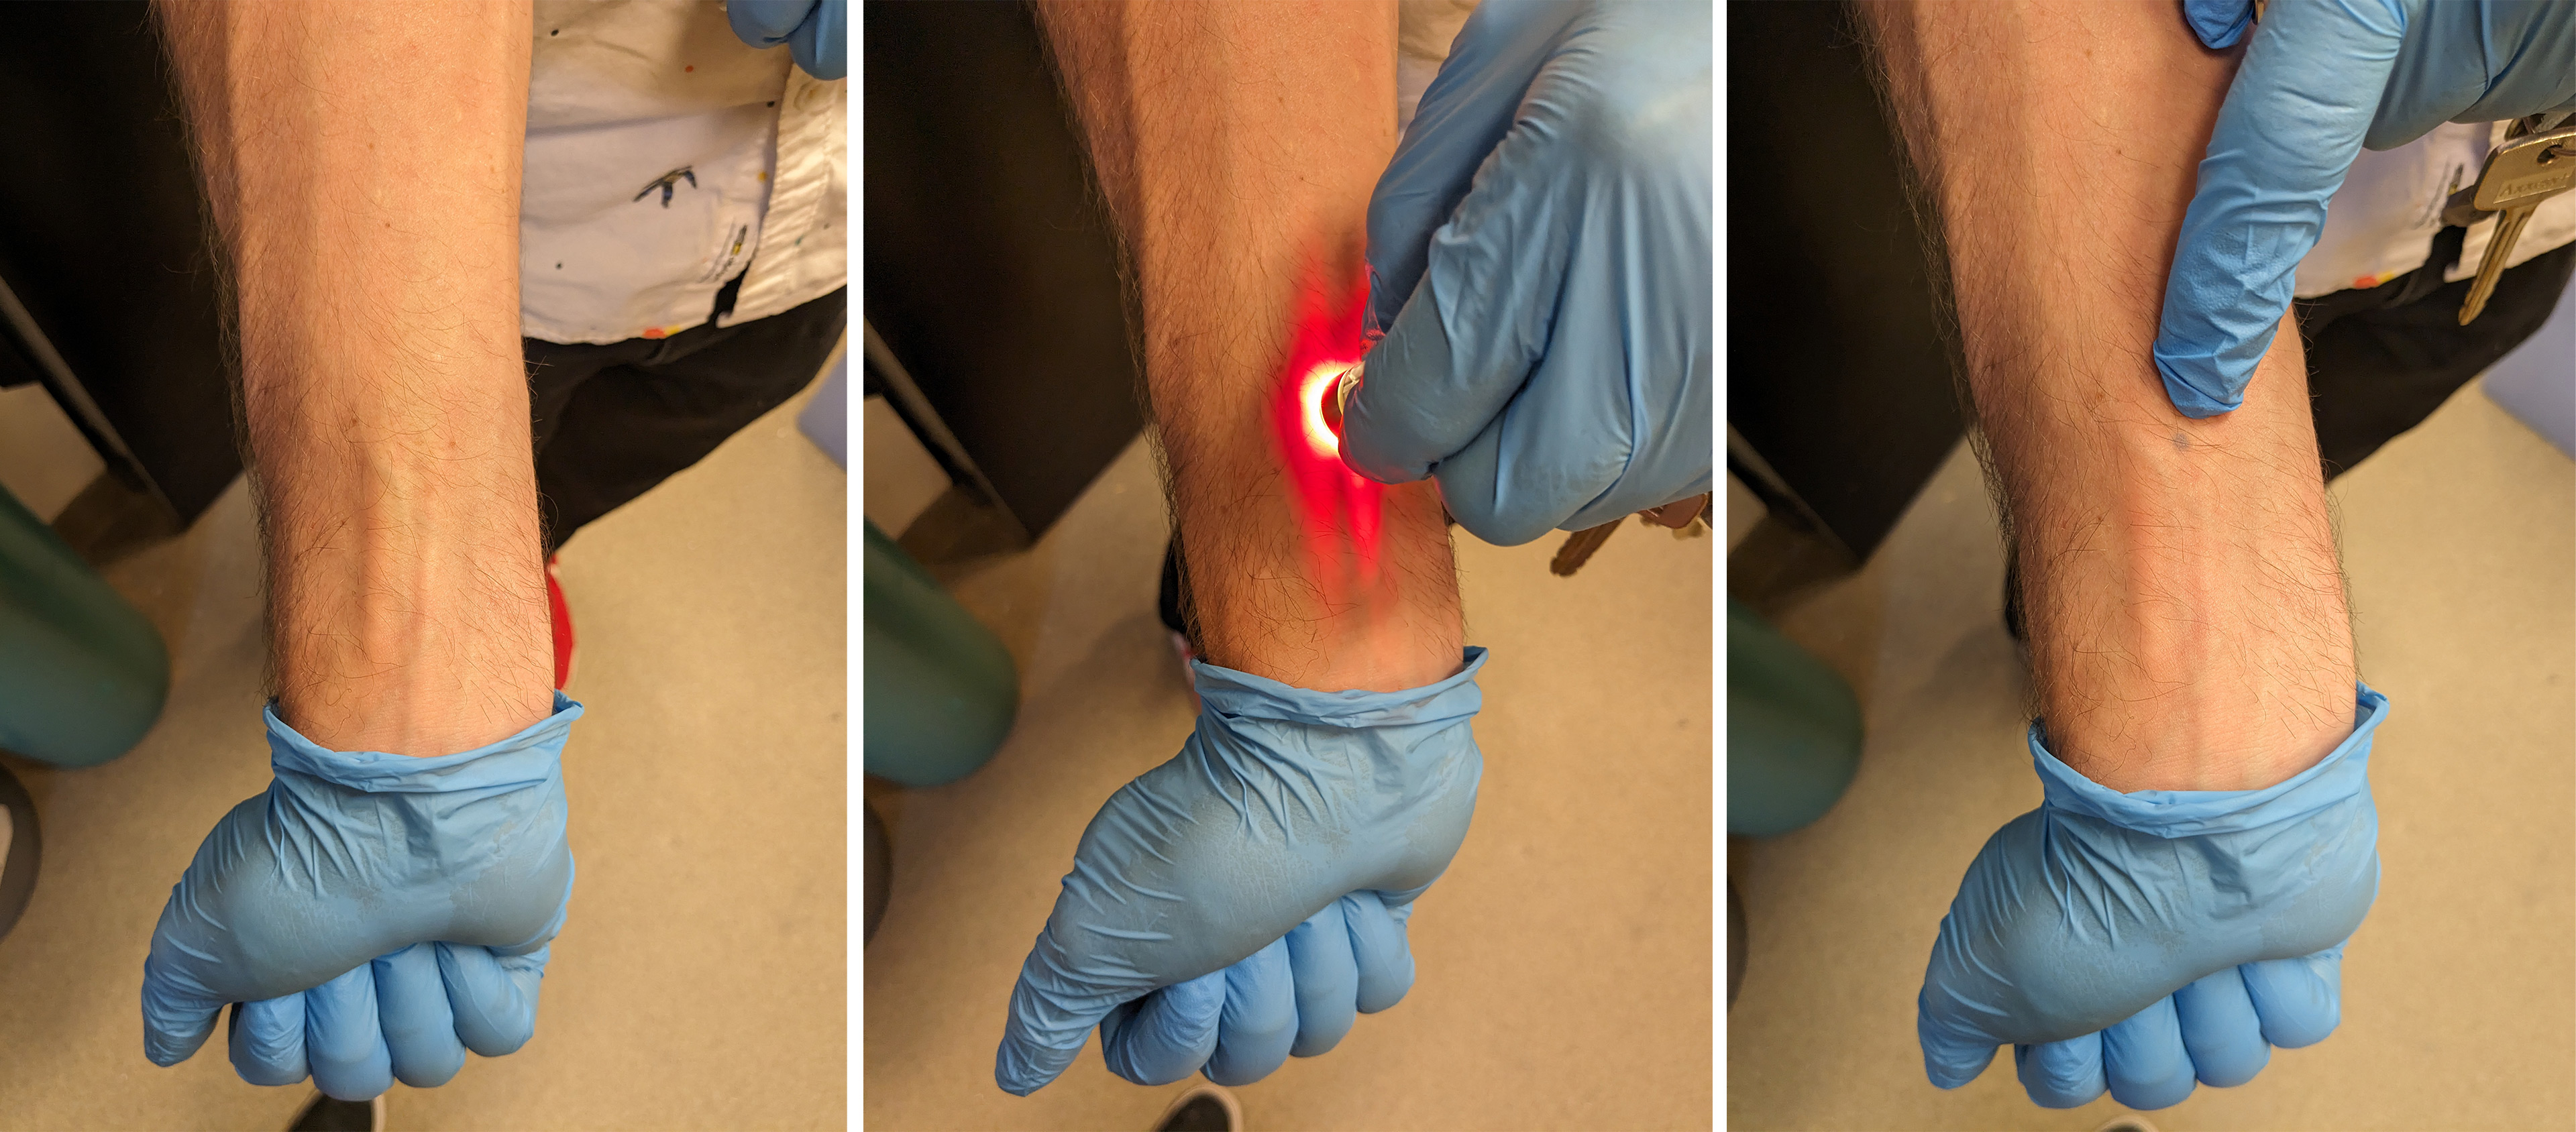 Three photos shown side-by-side: An arm with no tattoo; shining a UV light on their arm; their arm with a visible blue dot tattoo.